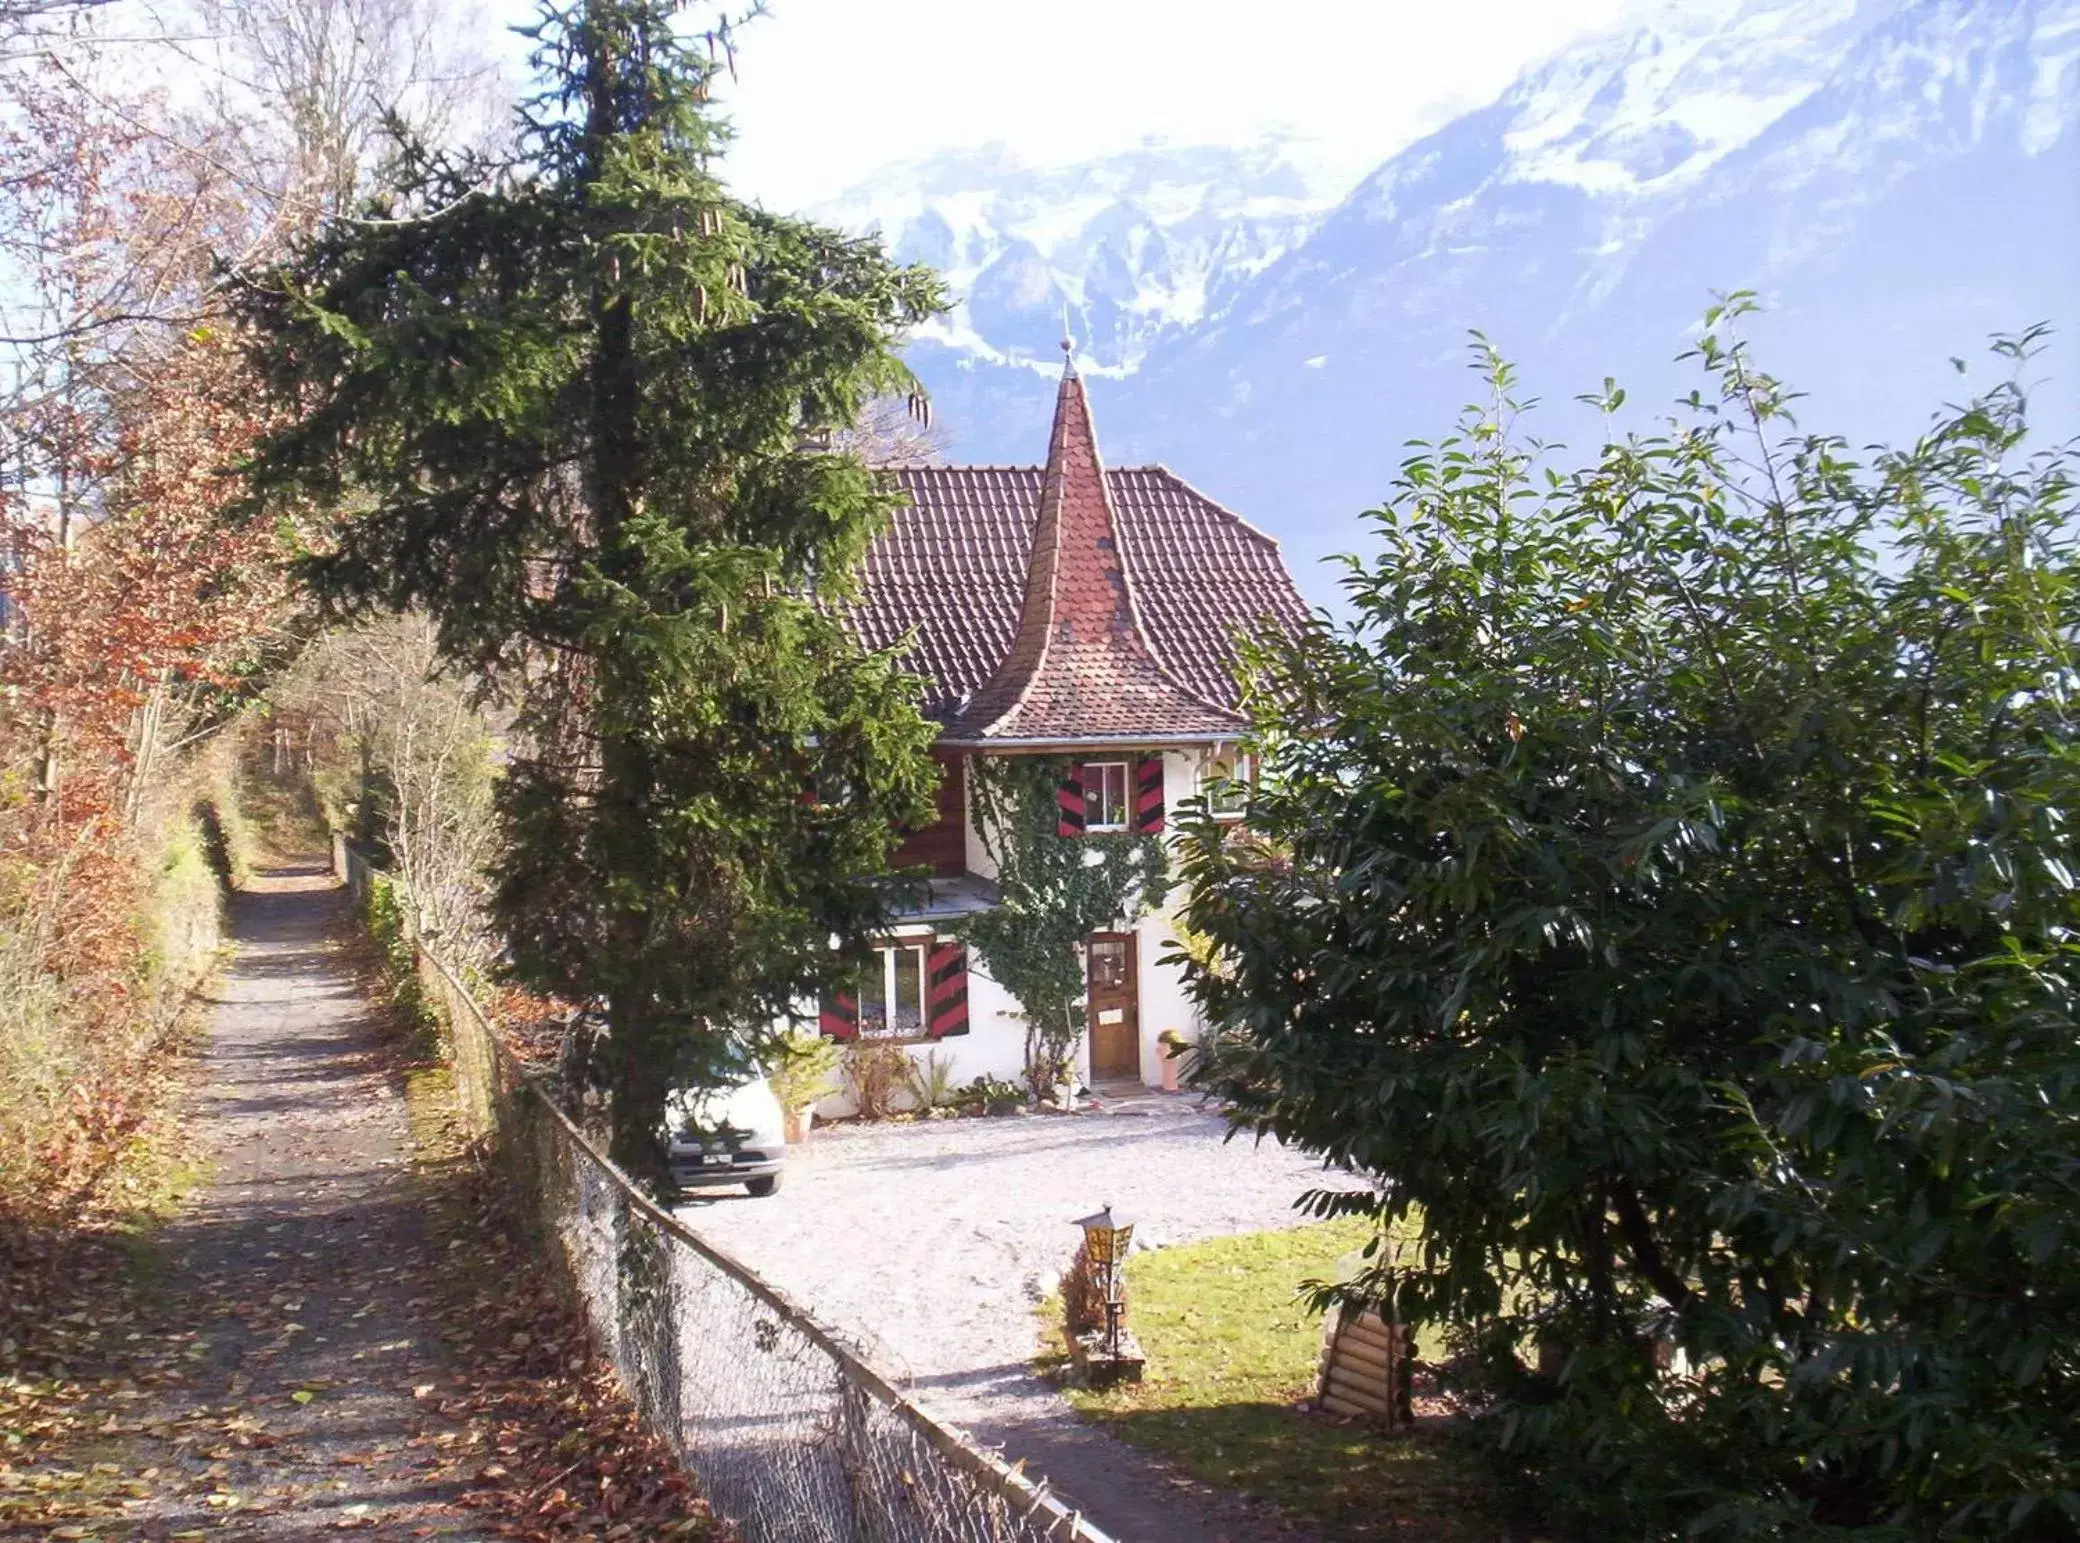 Hiking, Property Building in Alpina Boutique Hotel Ringgenberg